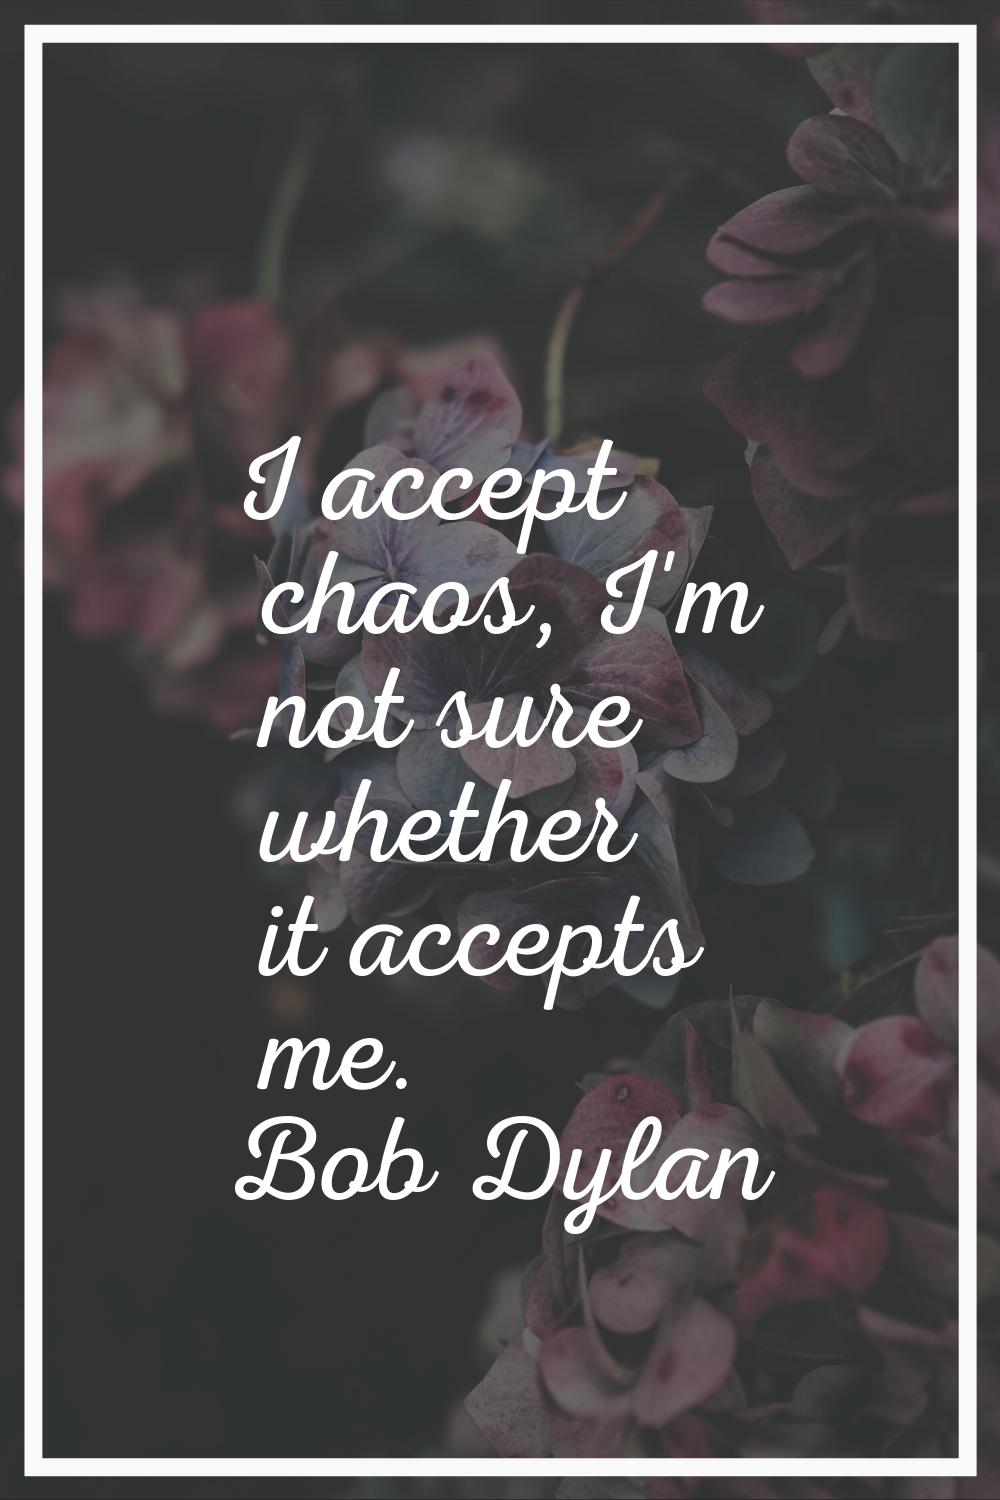 I accept chaos, I'm not sure whether it accepts me.